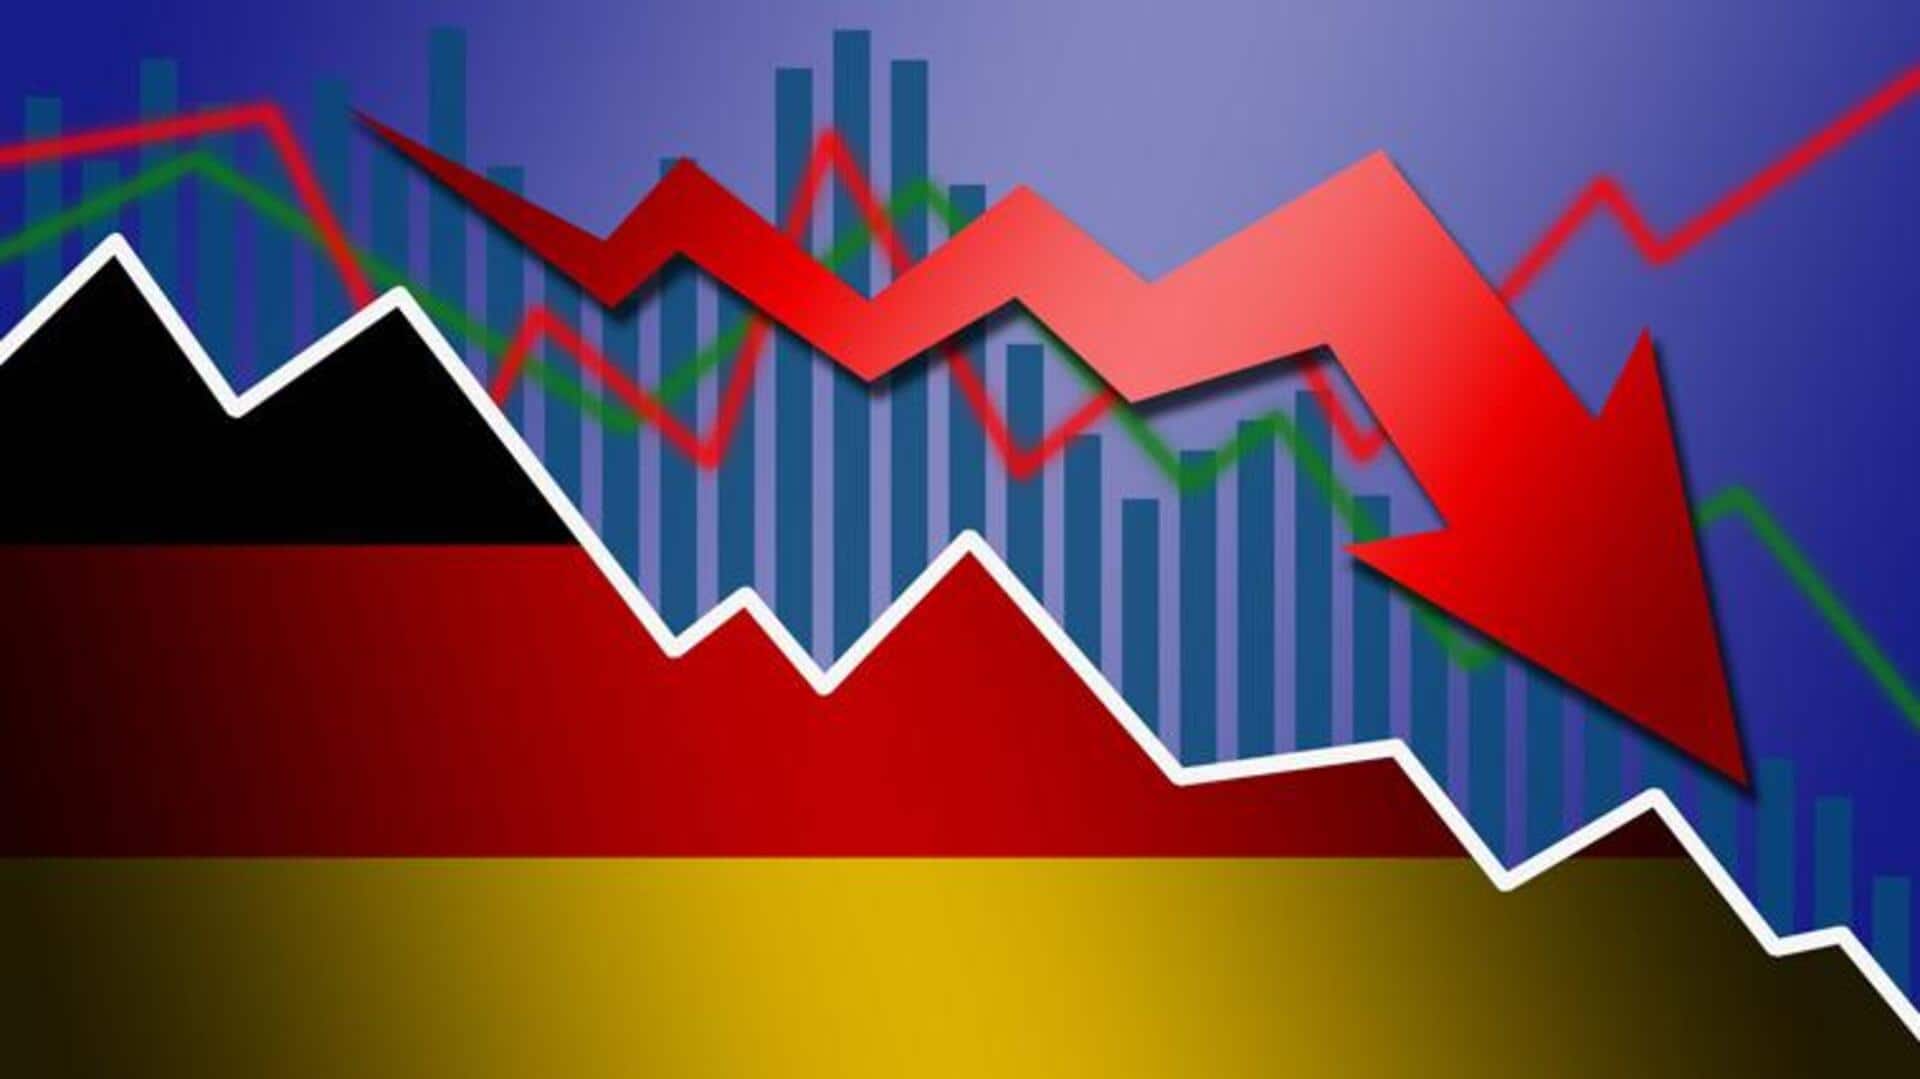 German economy to contract in 2023, predicts European Commission